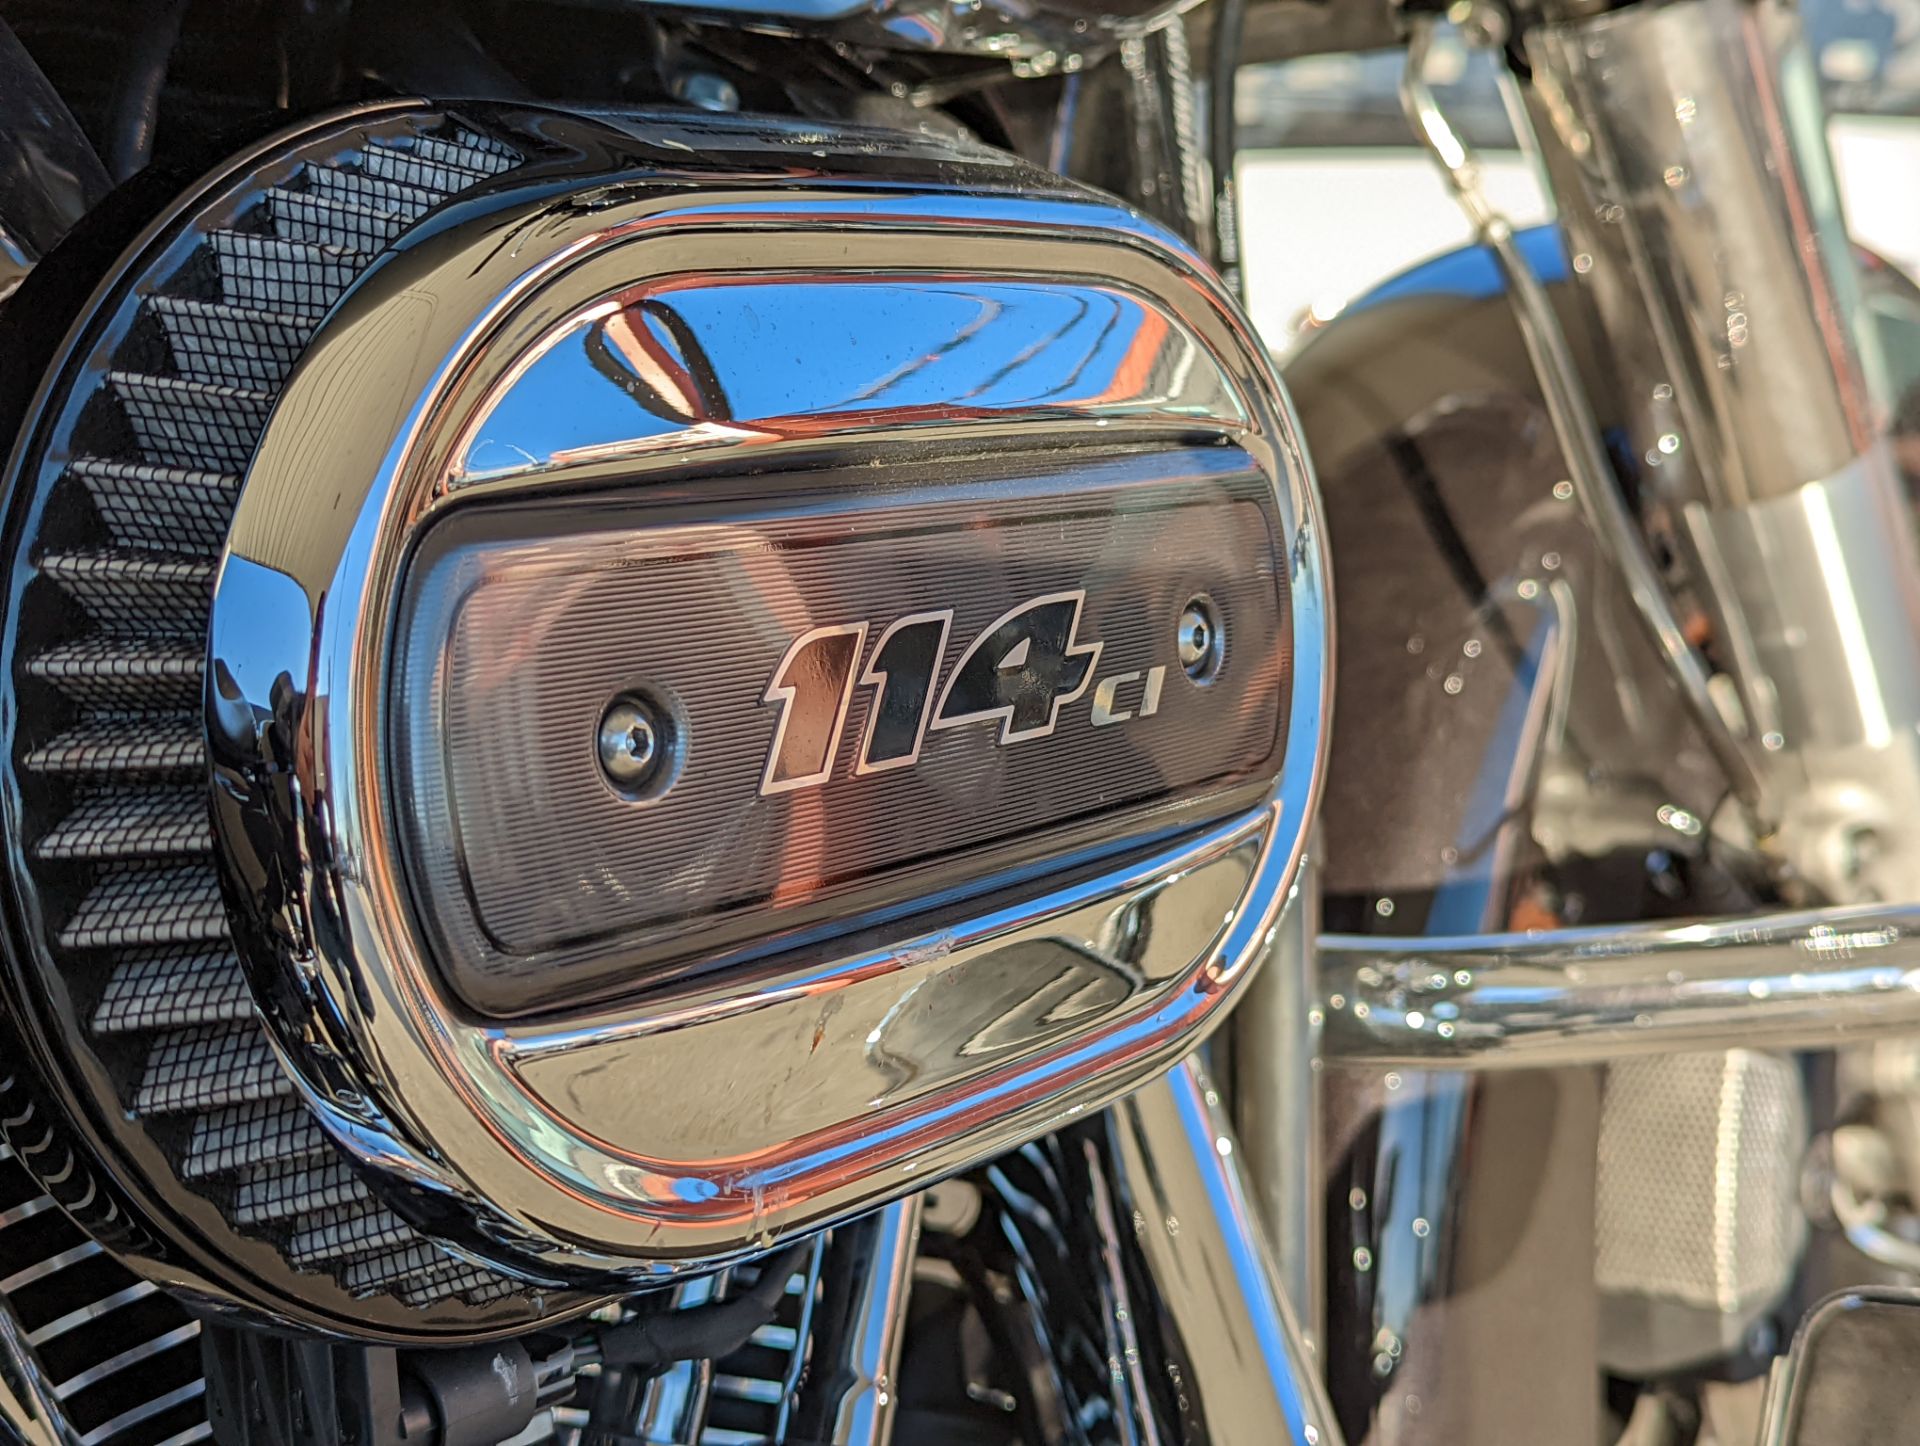 2021 Harley-Davidson Street Glide® Special in Marion, Illinois - Photo 8